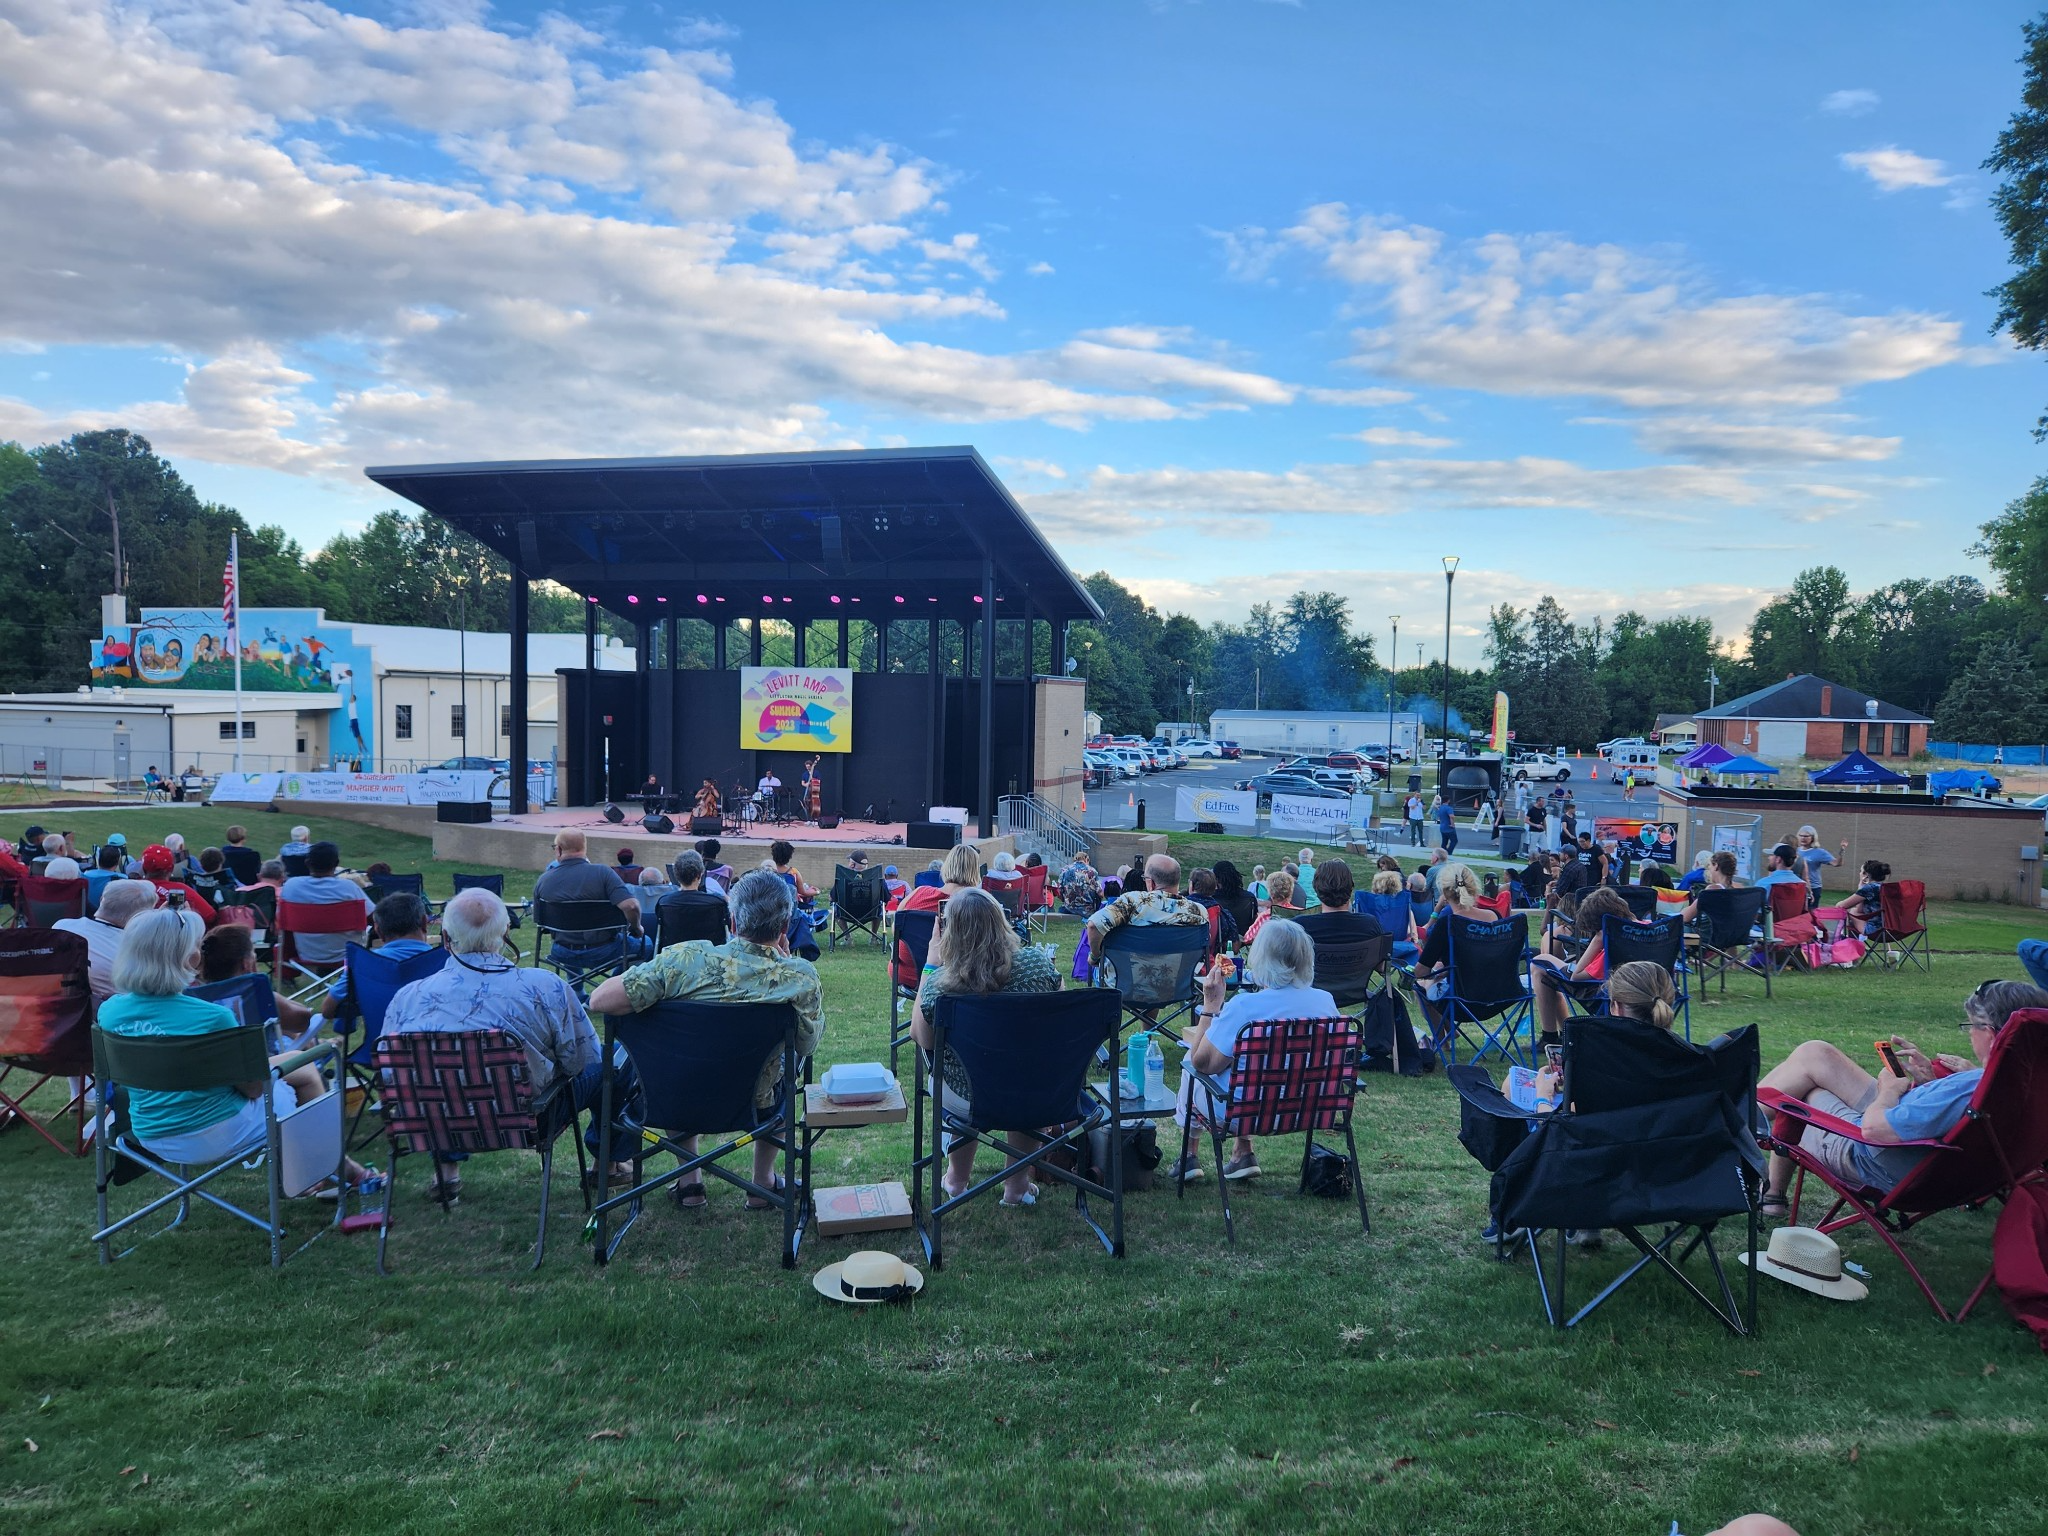 A photo of Littleton residents gathering on the green lawn of the Lakeland Amphitheater. They are sitting in folding chairs in front of the stage. The sky is bright blue with tons of white, puffy clouds.